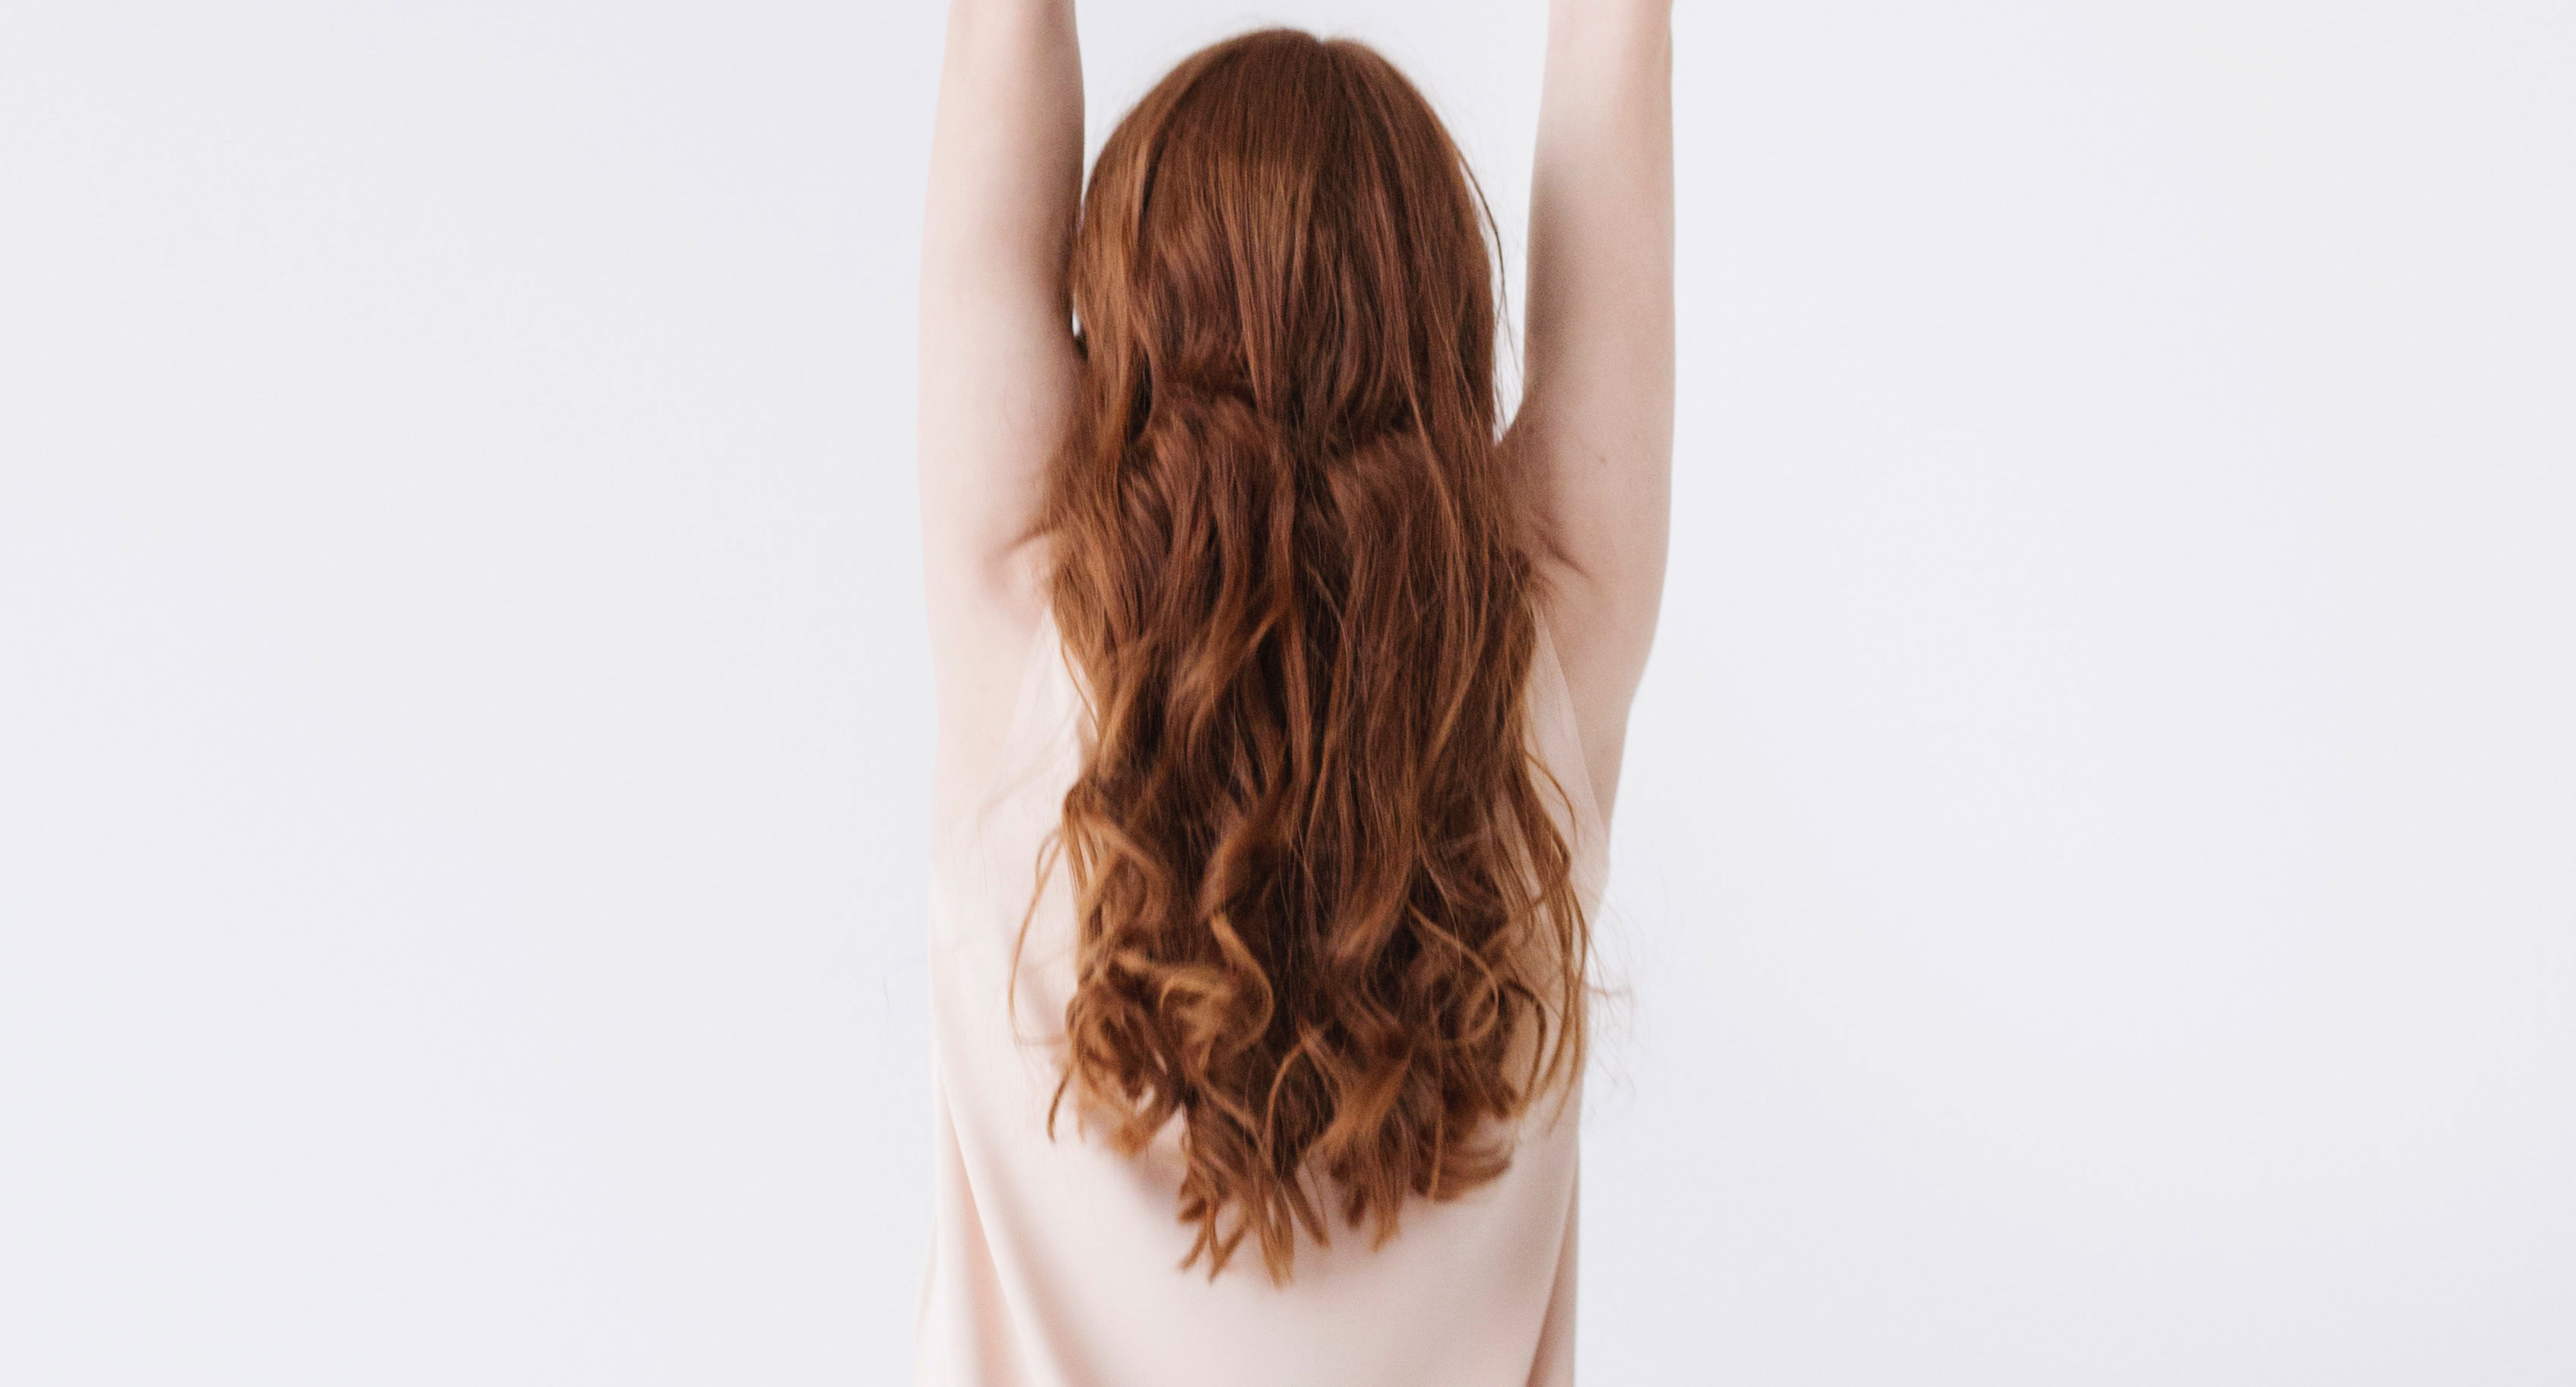 Our tips for fighting oily hair